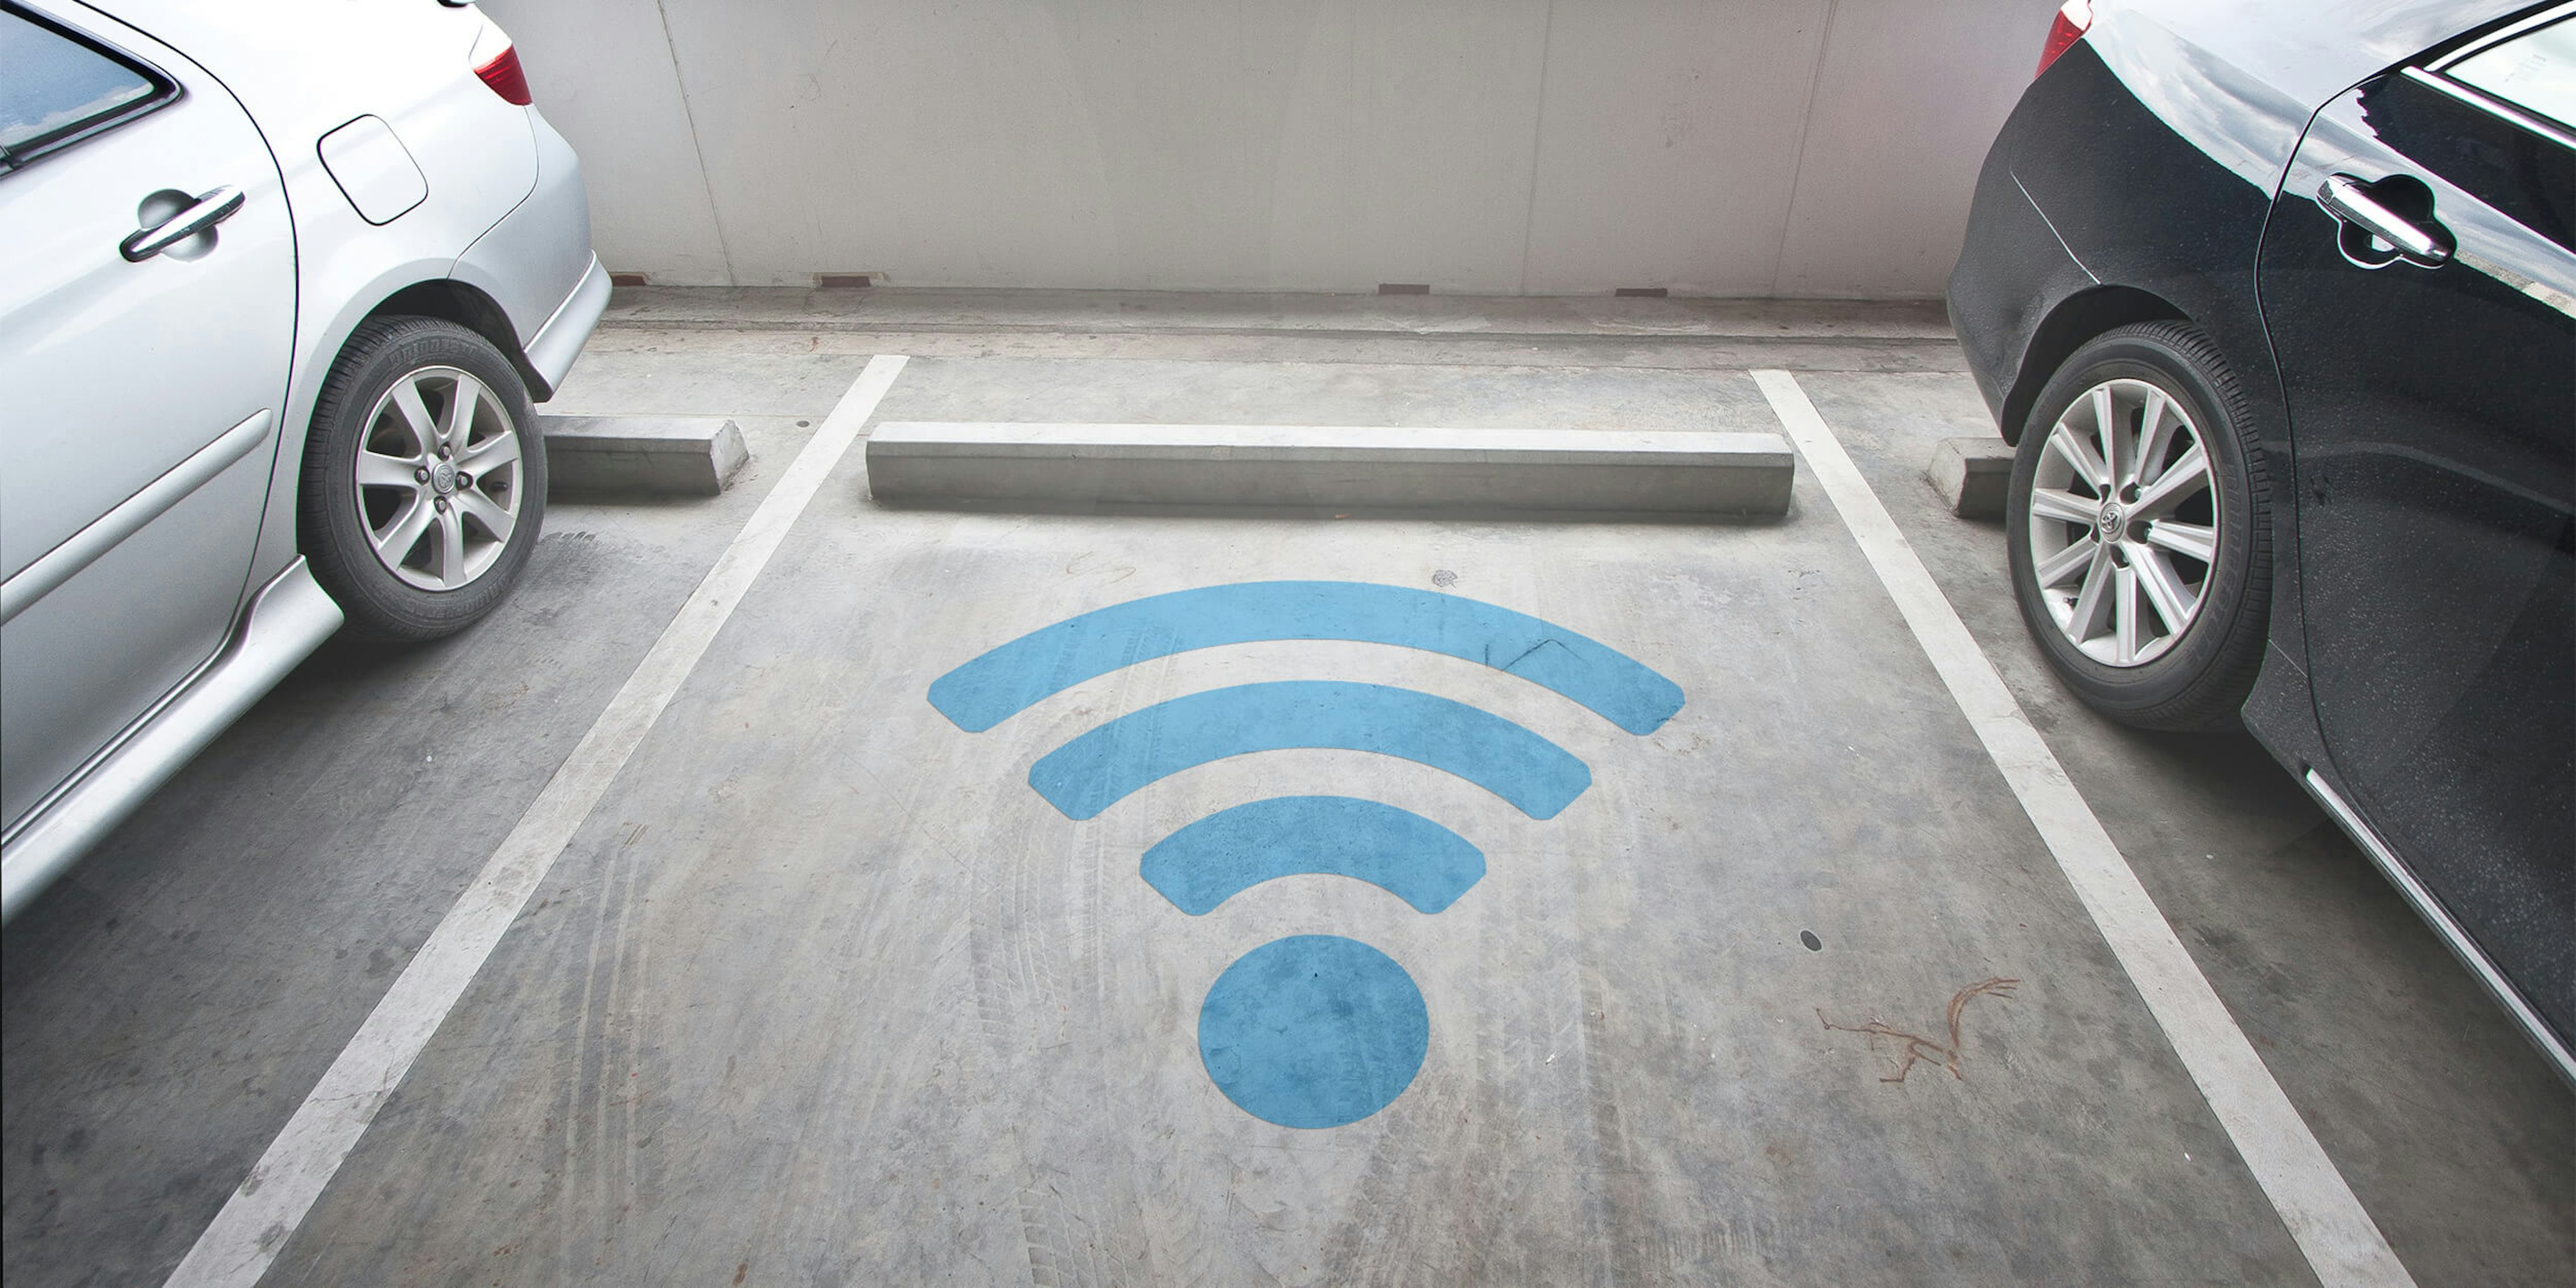 wifi symbol spray painted in empty parking space